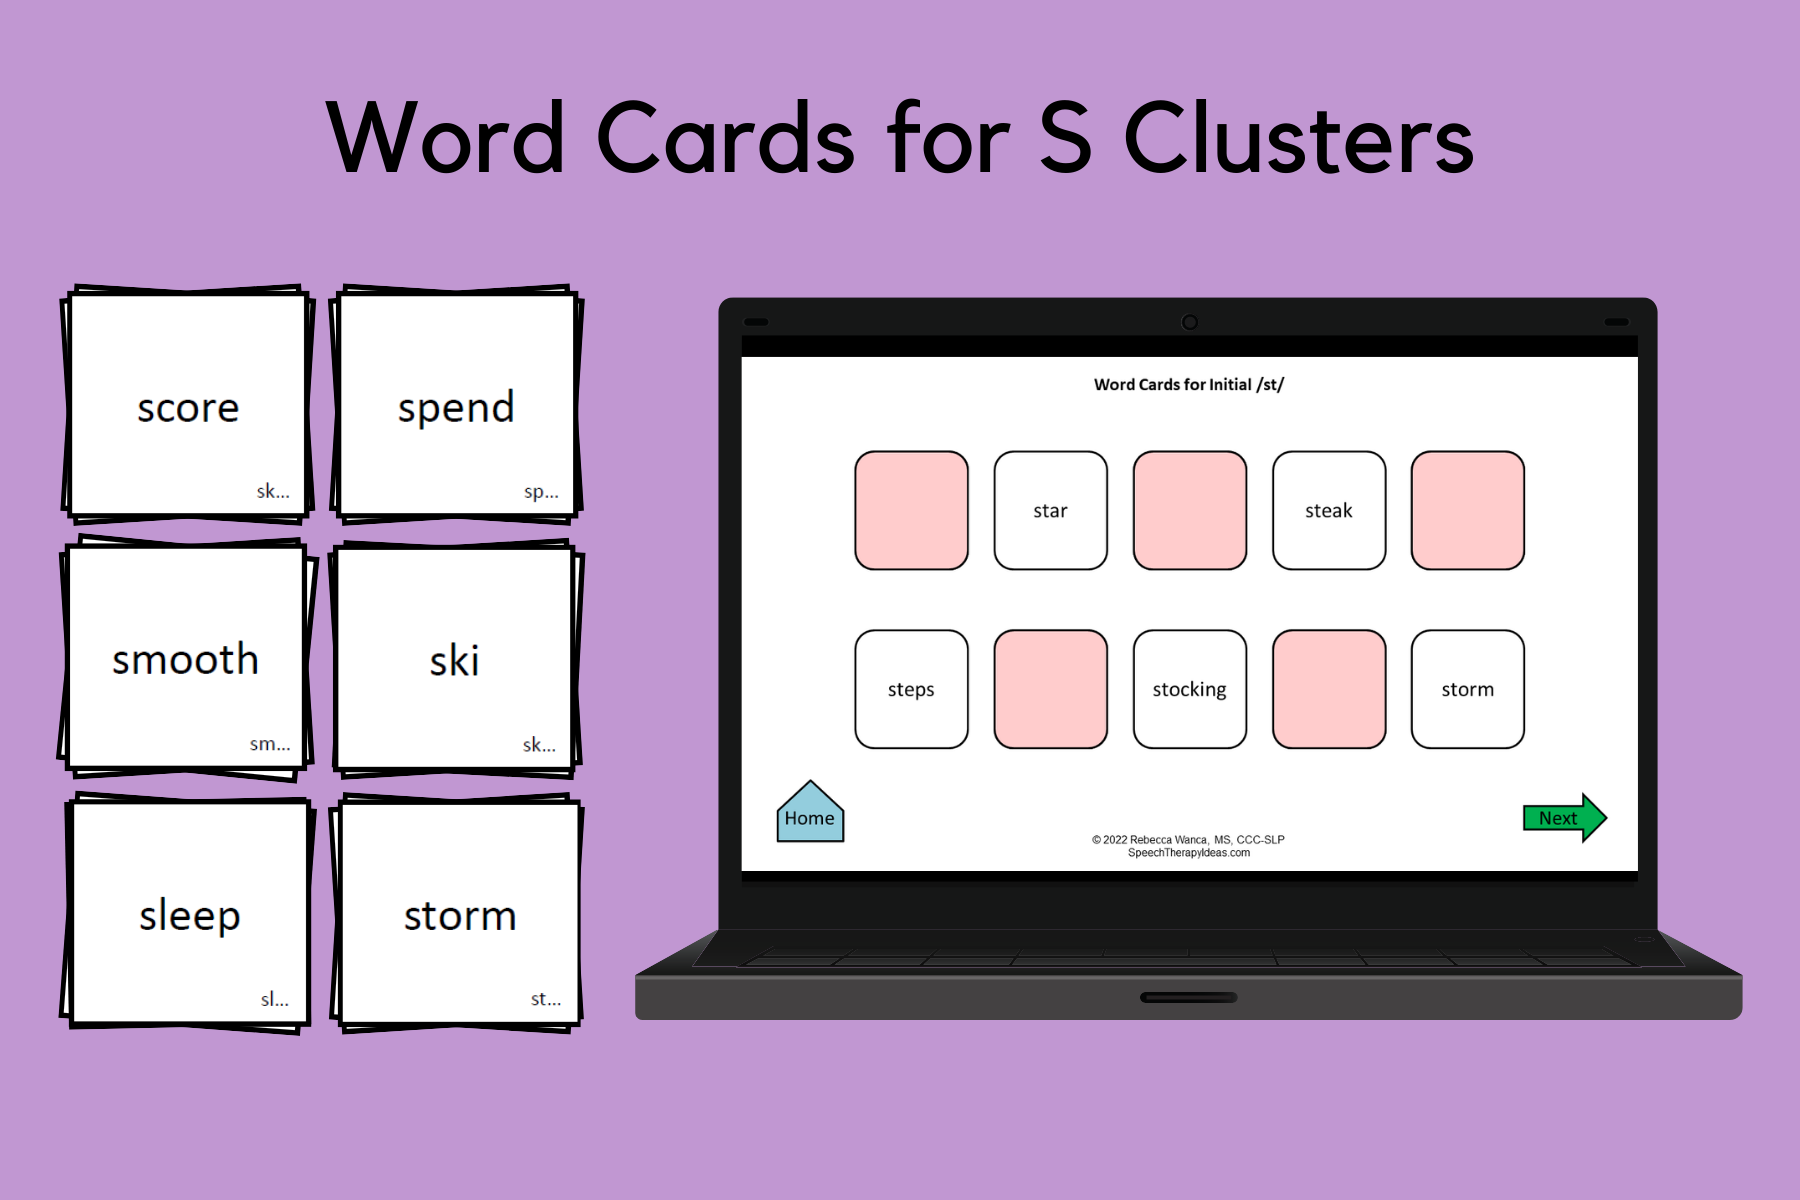 Word Cards for S Clusters